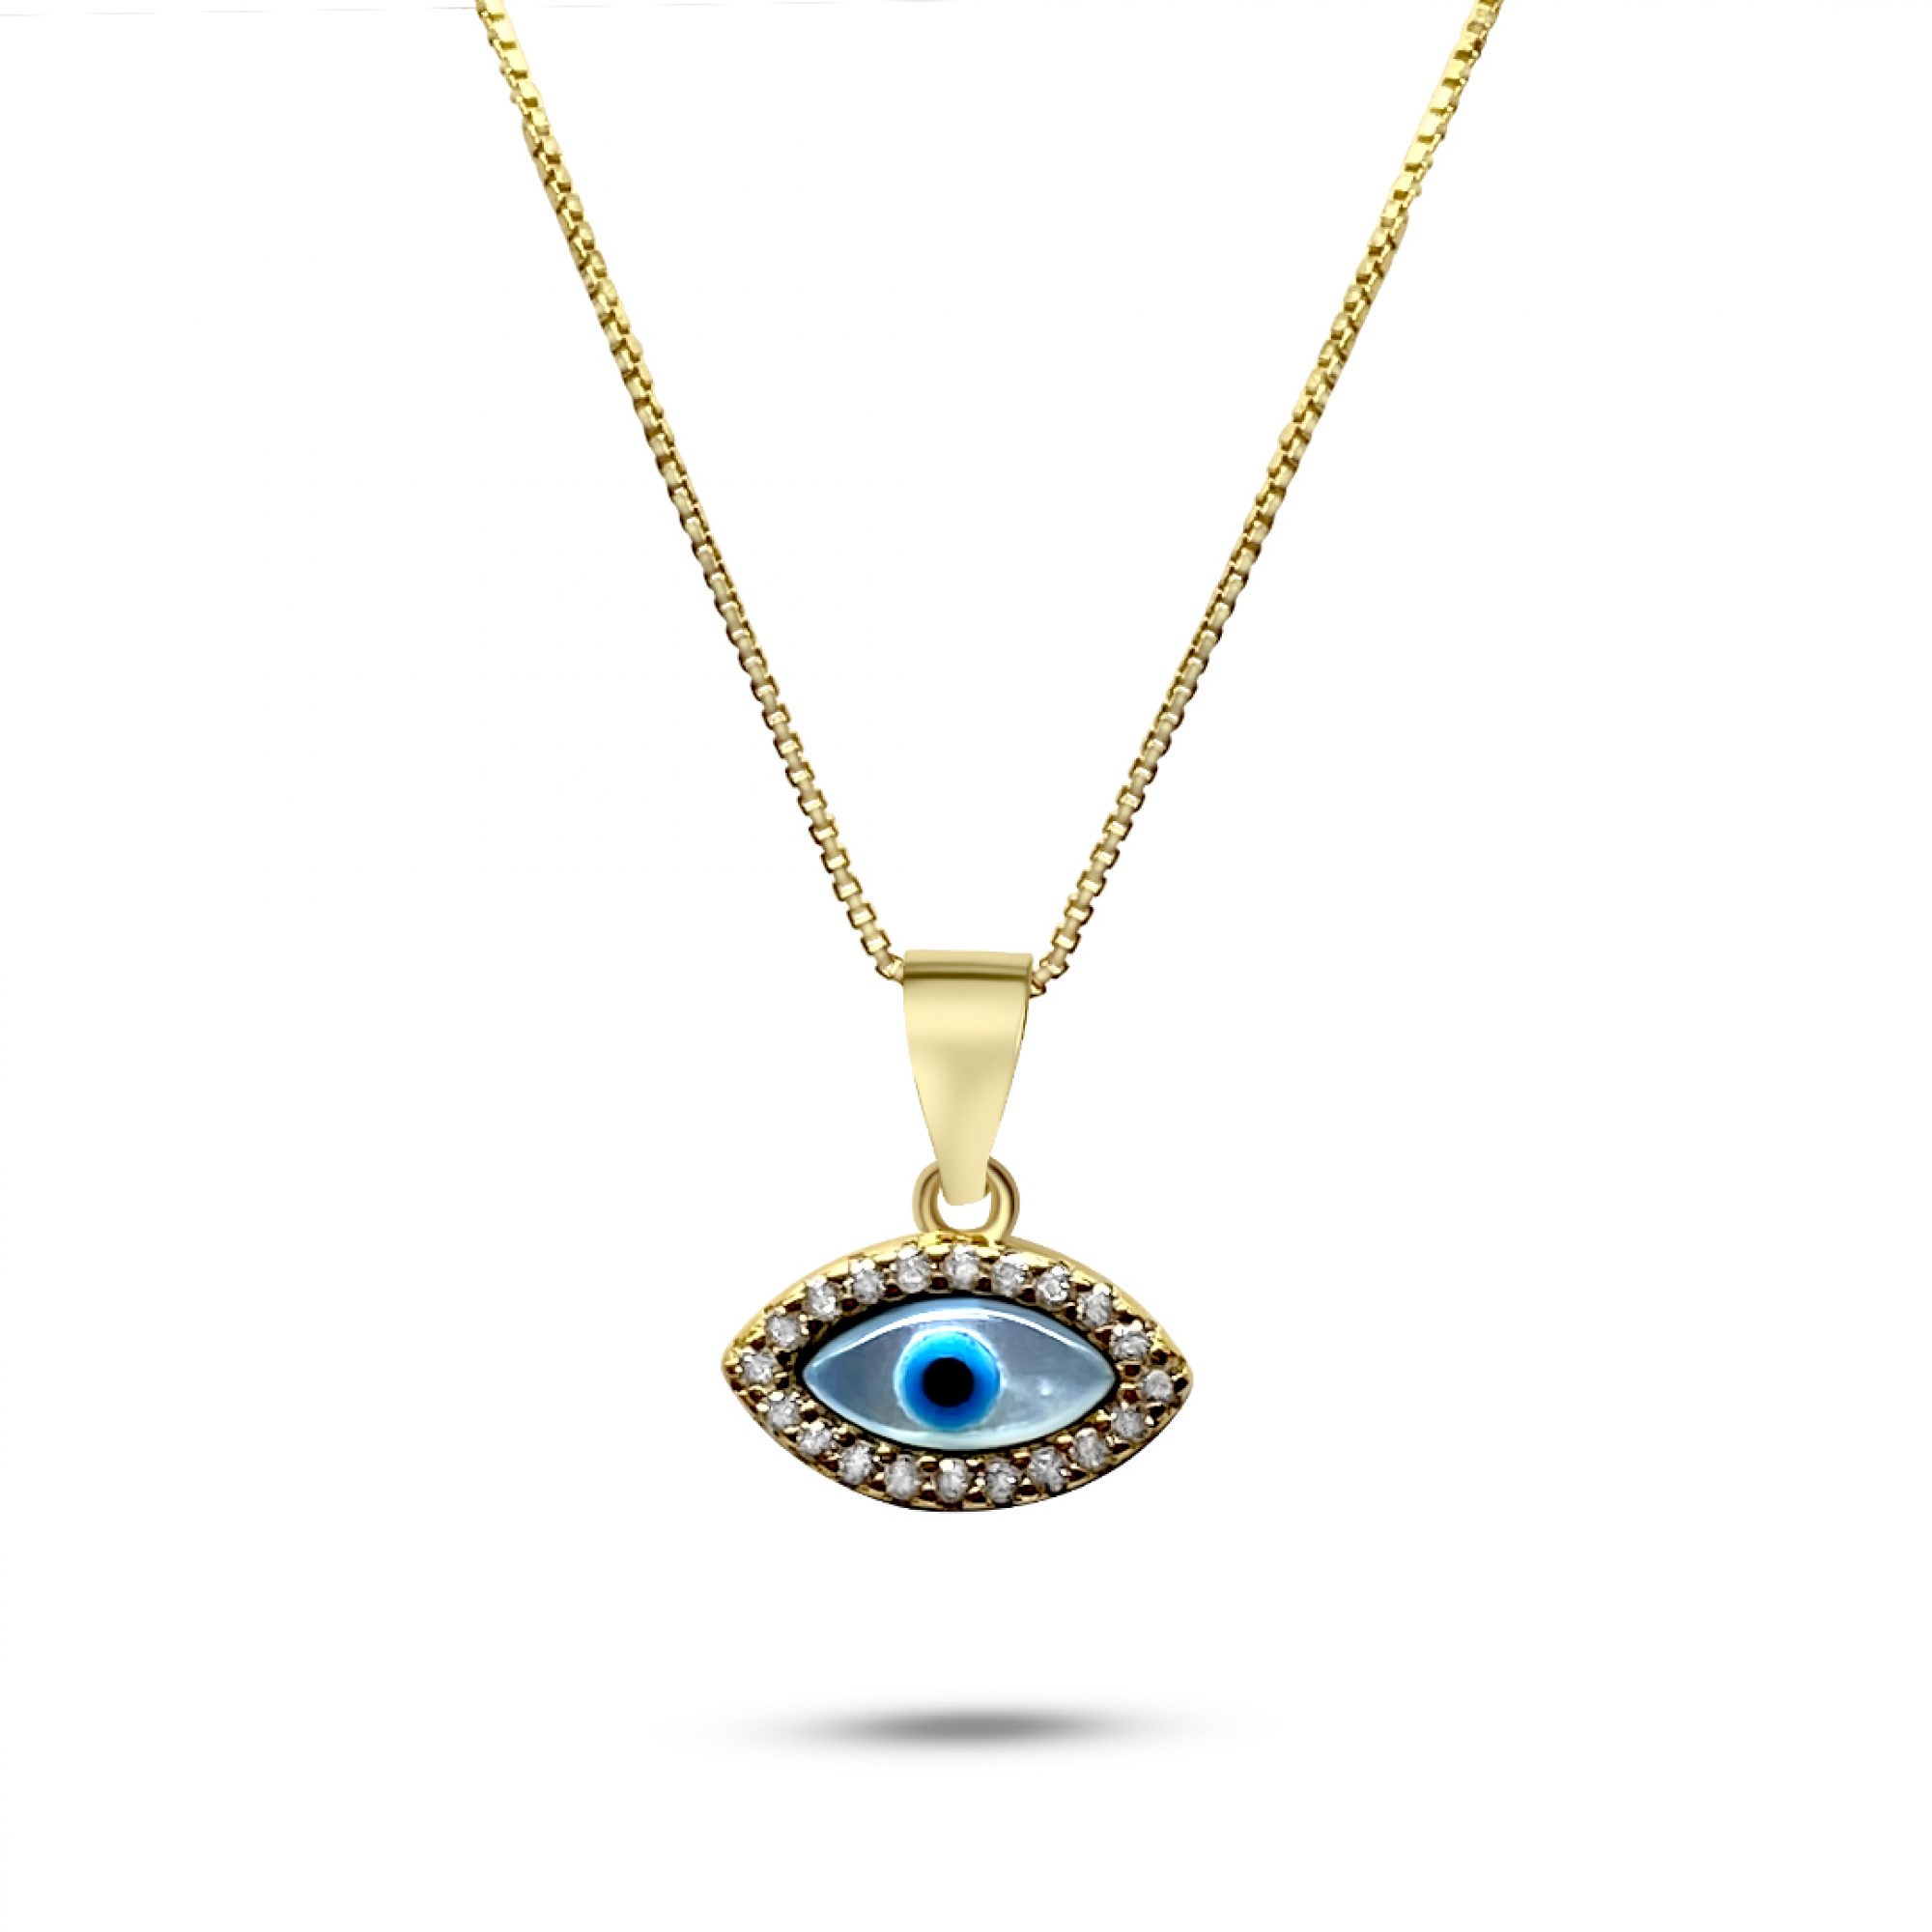 Gold plated eye pendant necklace with mother of pearl and zircon stones